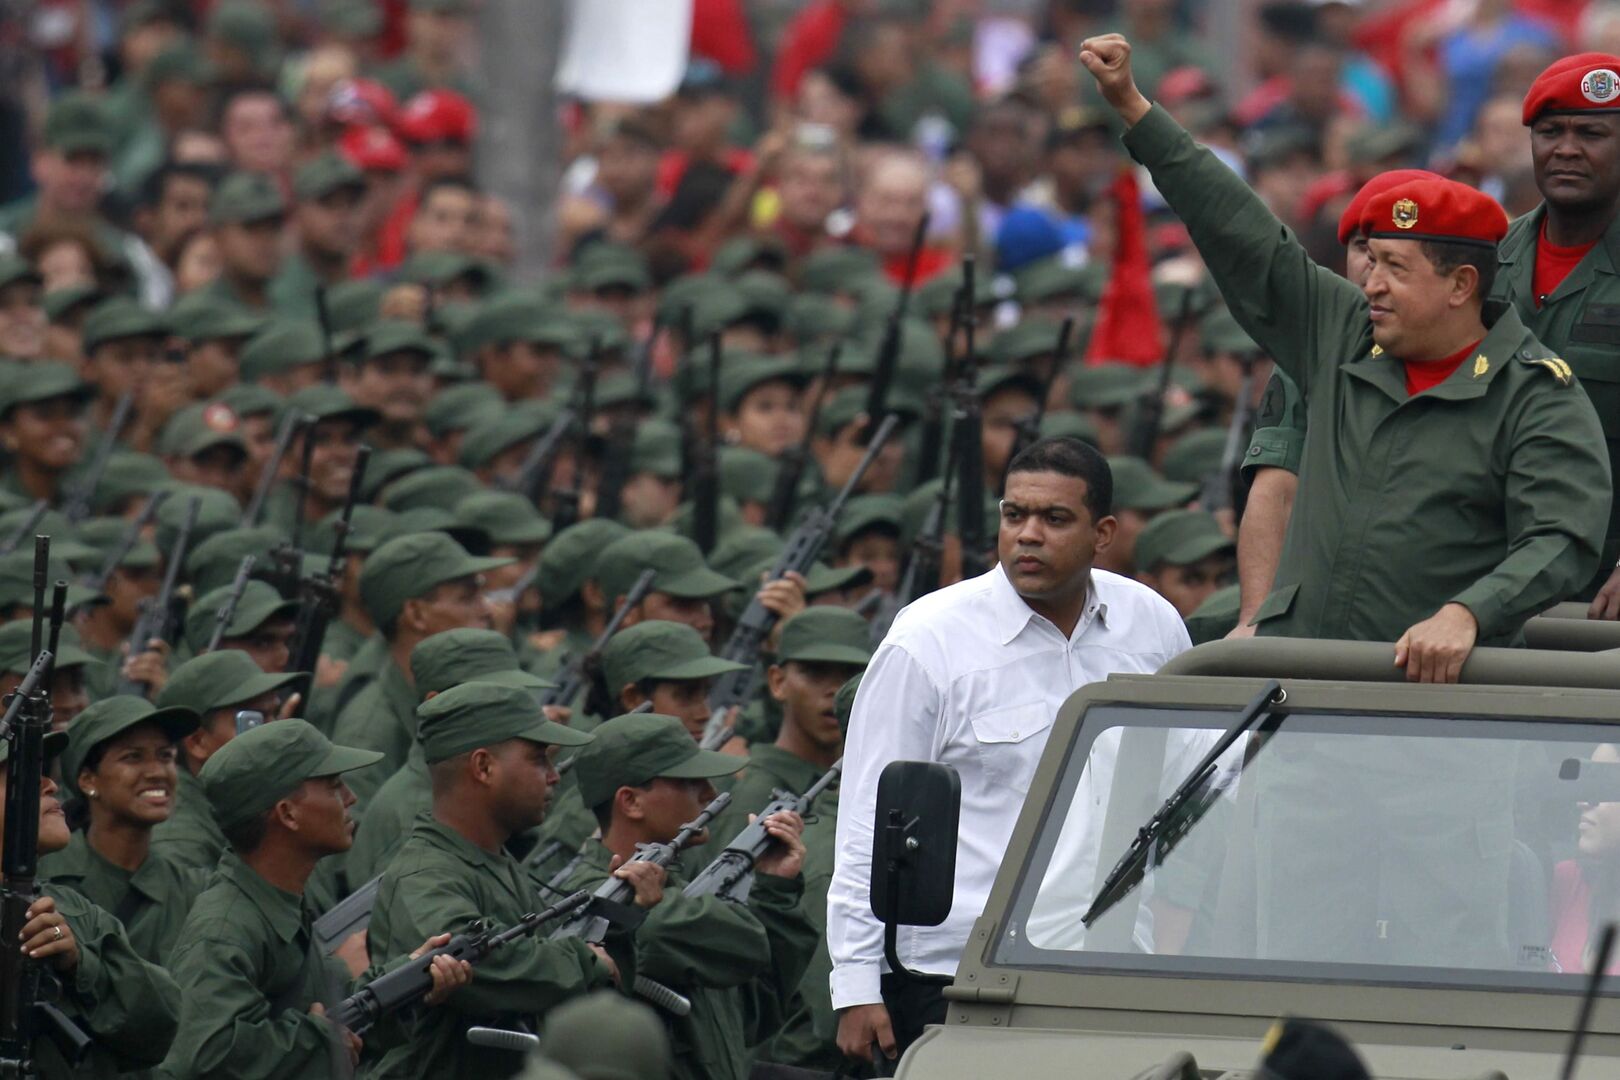 In 1998 Hugo Chavez, a former paratrooper and coup leader, was elected President of Venezuela. 